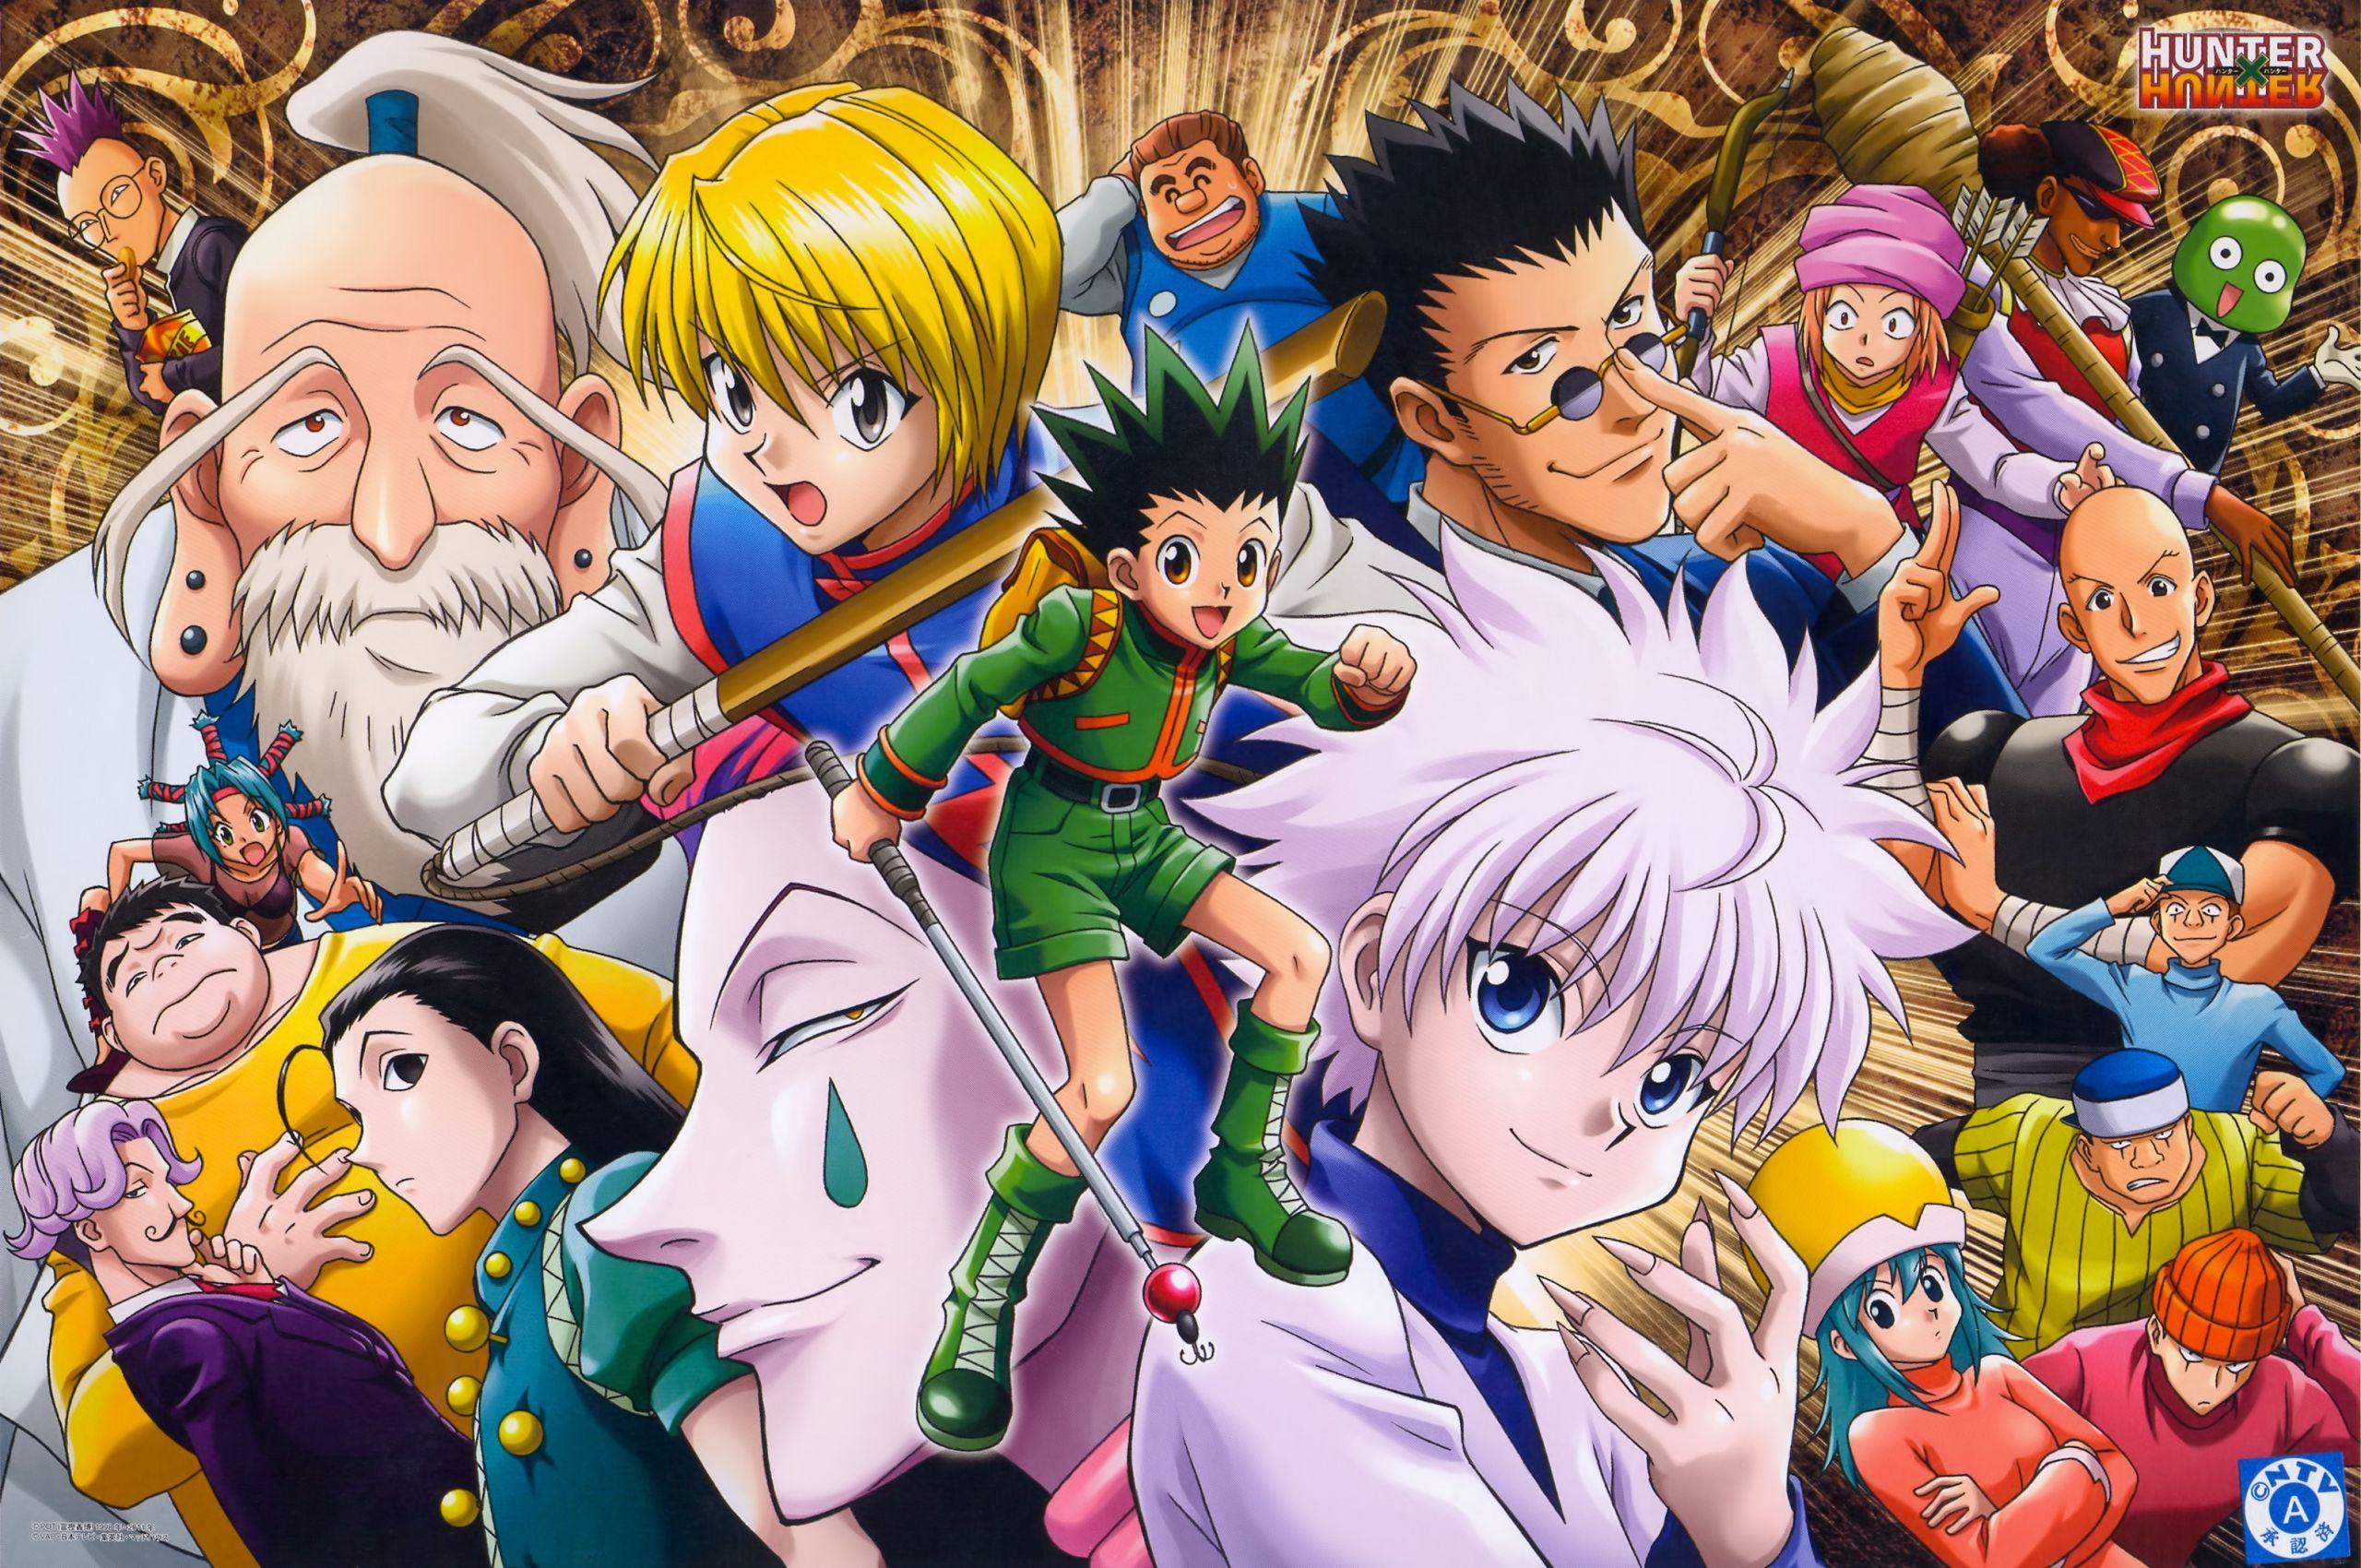 2560 x 1700 · jpeg - Anime Aesthetic HxH Wallpapers - Wallpaper Cave